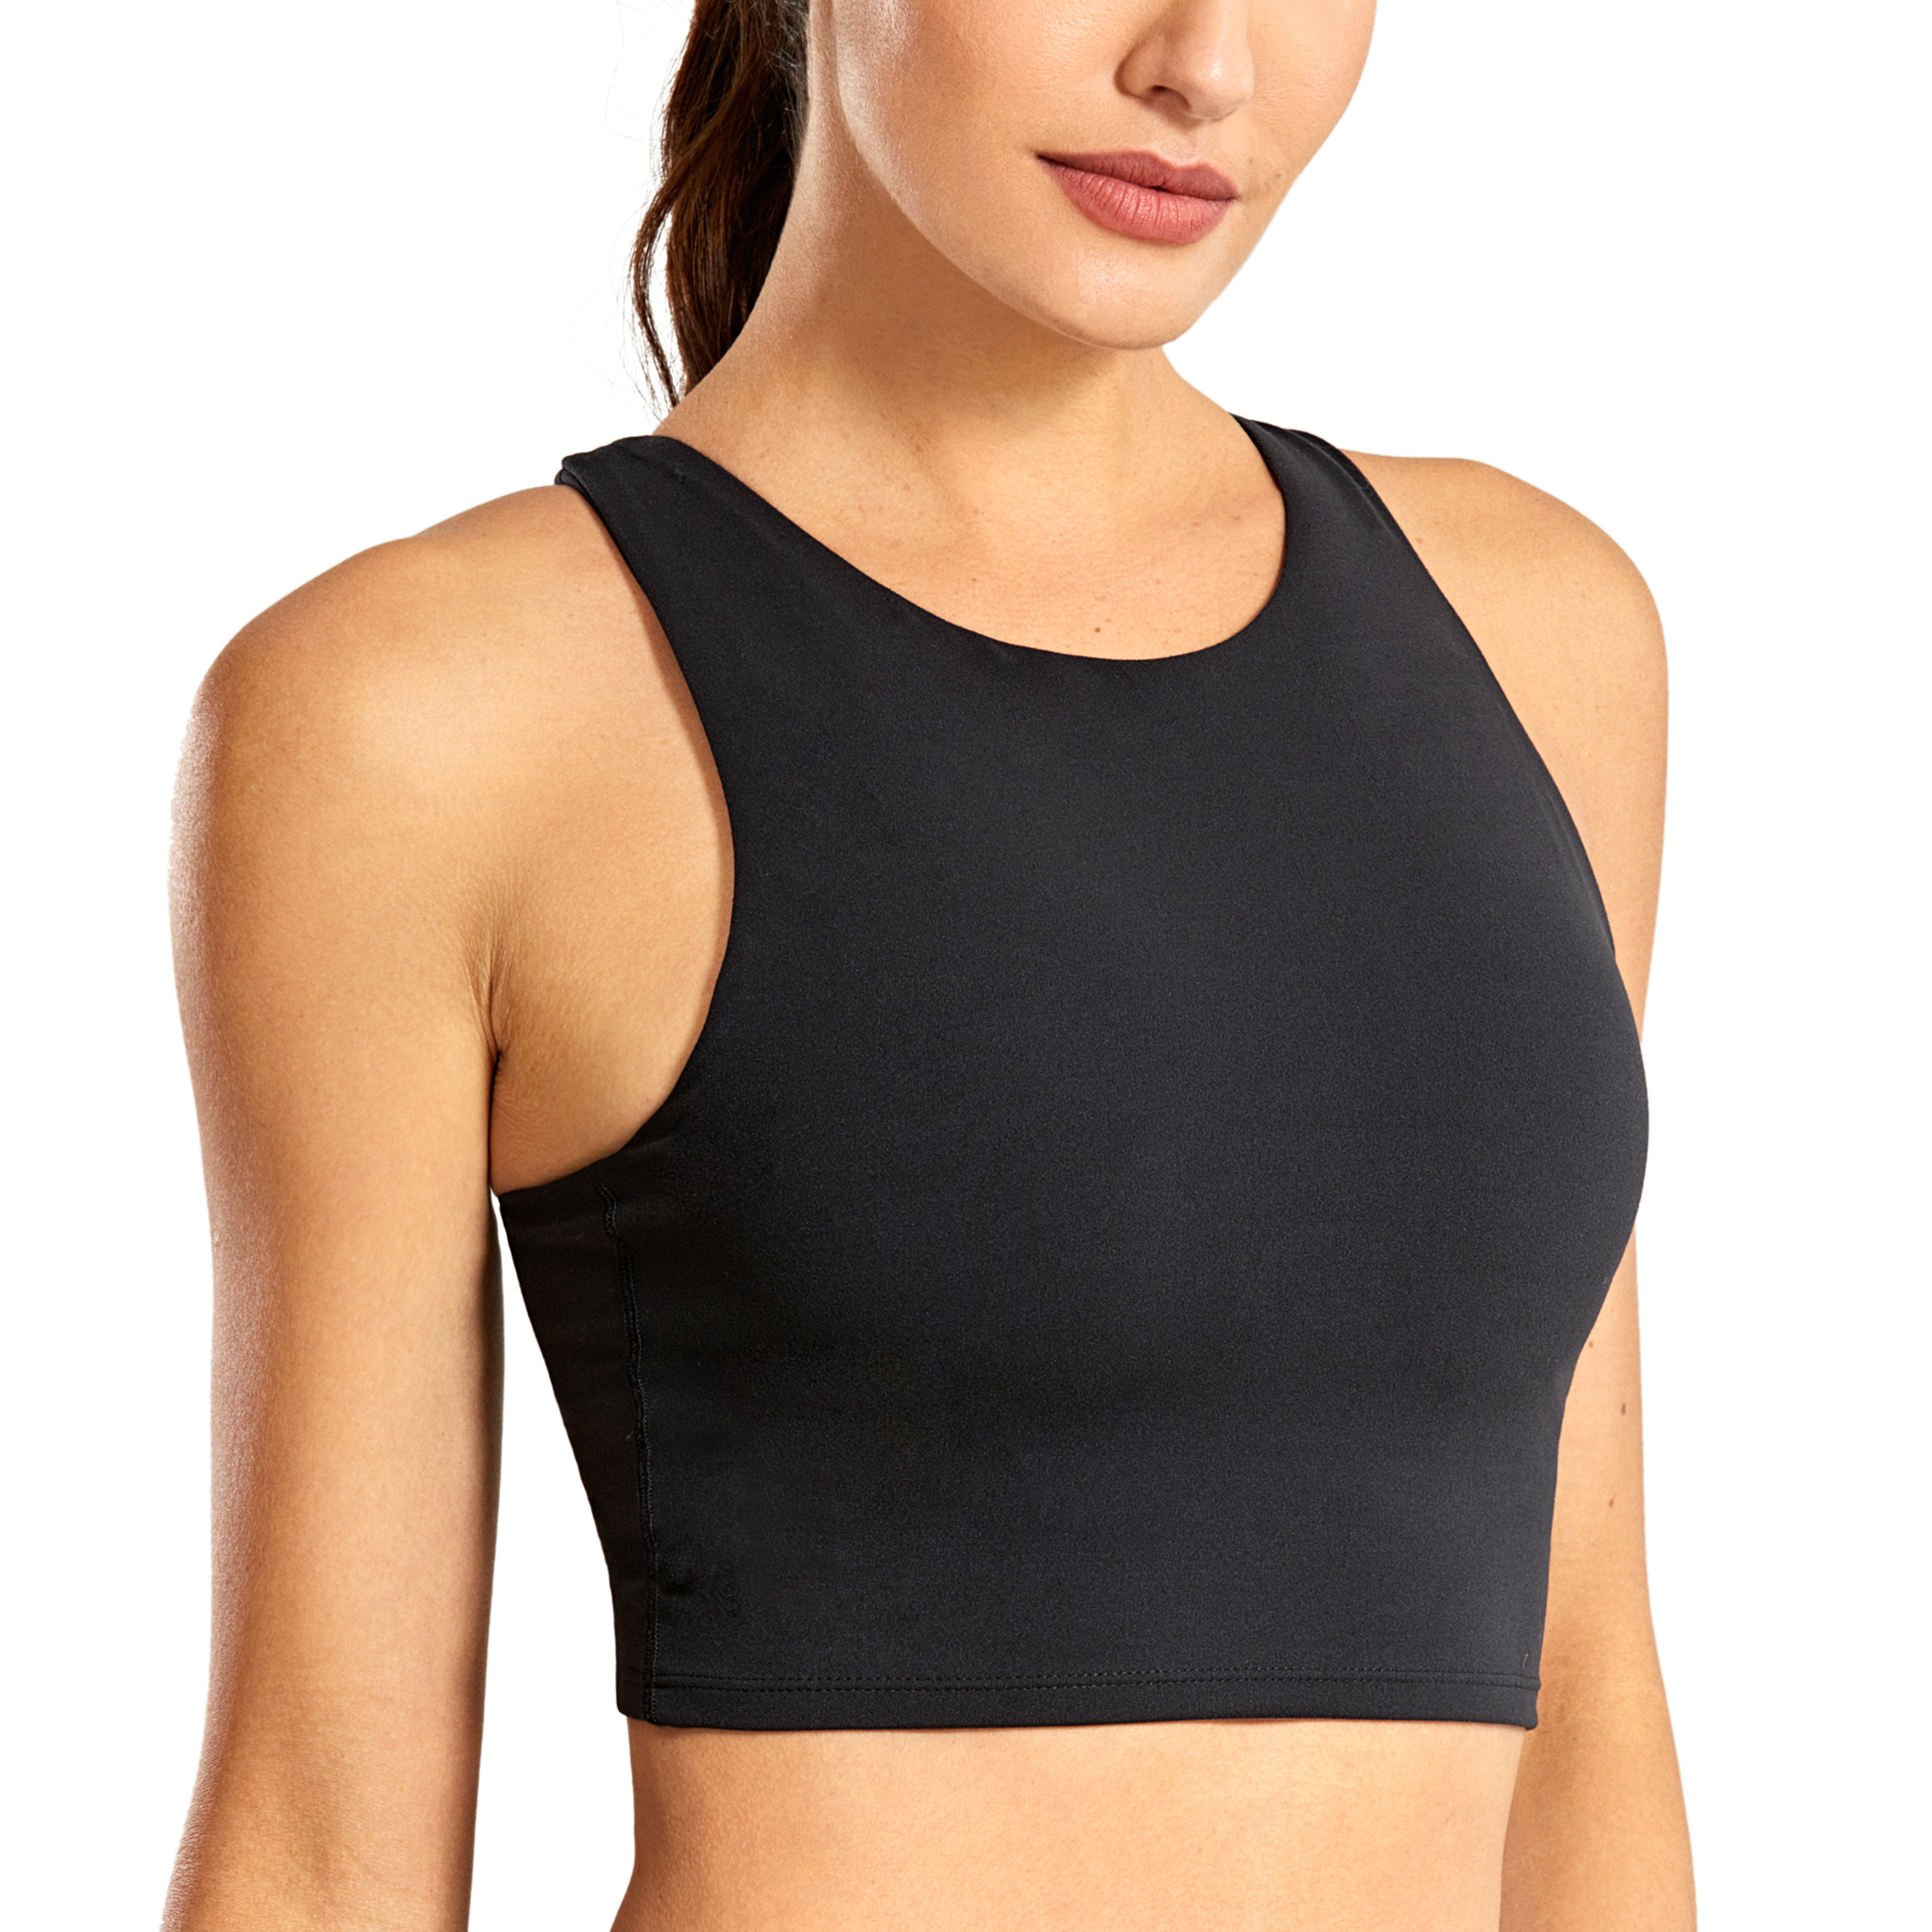 Poipoico High-Neck Sports Bra,Low Impact Stretchy Bralette Padded,Cute Comfy Crop Top for Yoga Running Dancing Workout 